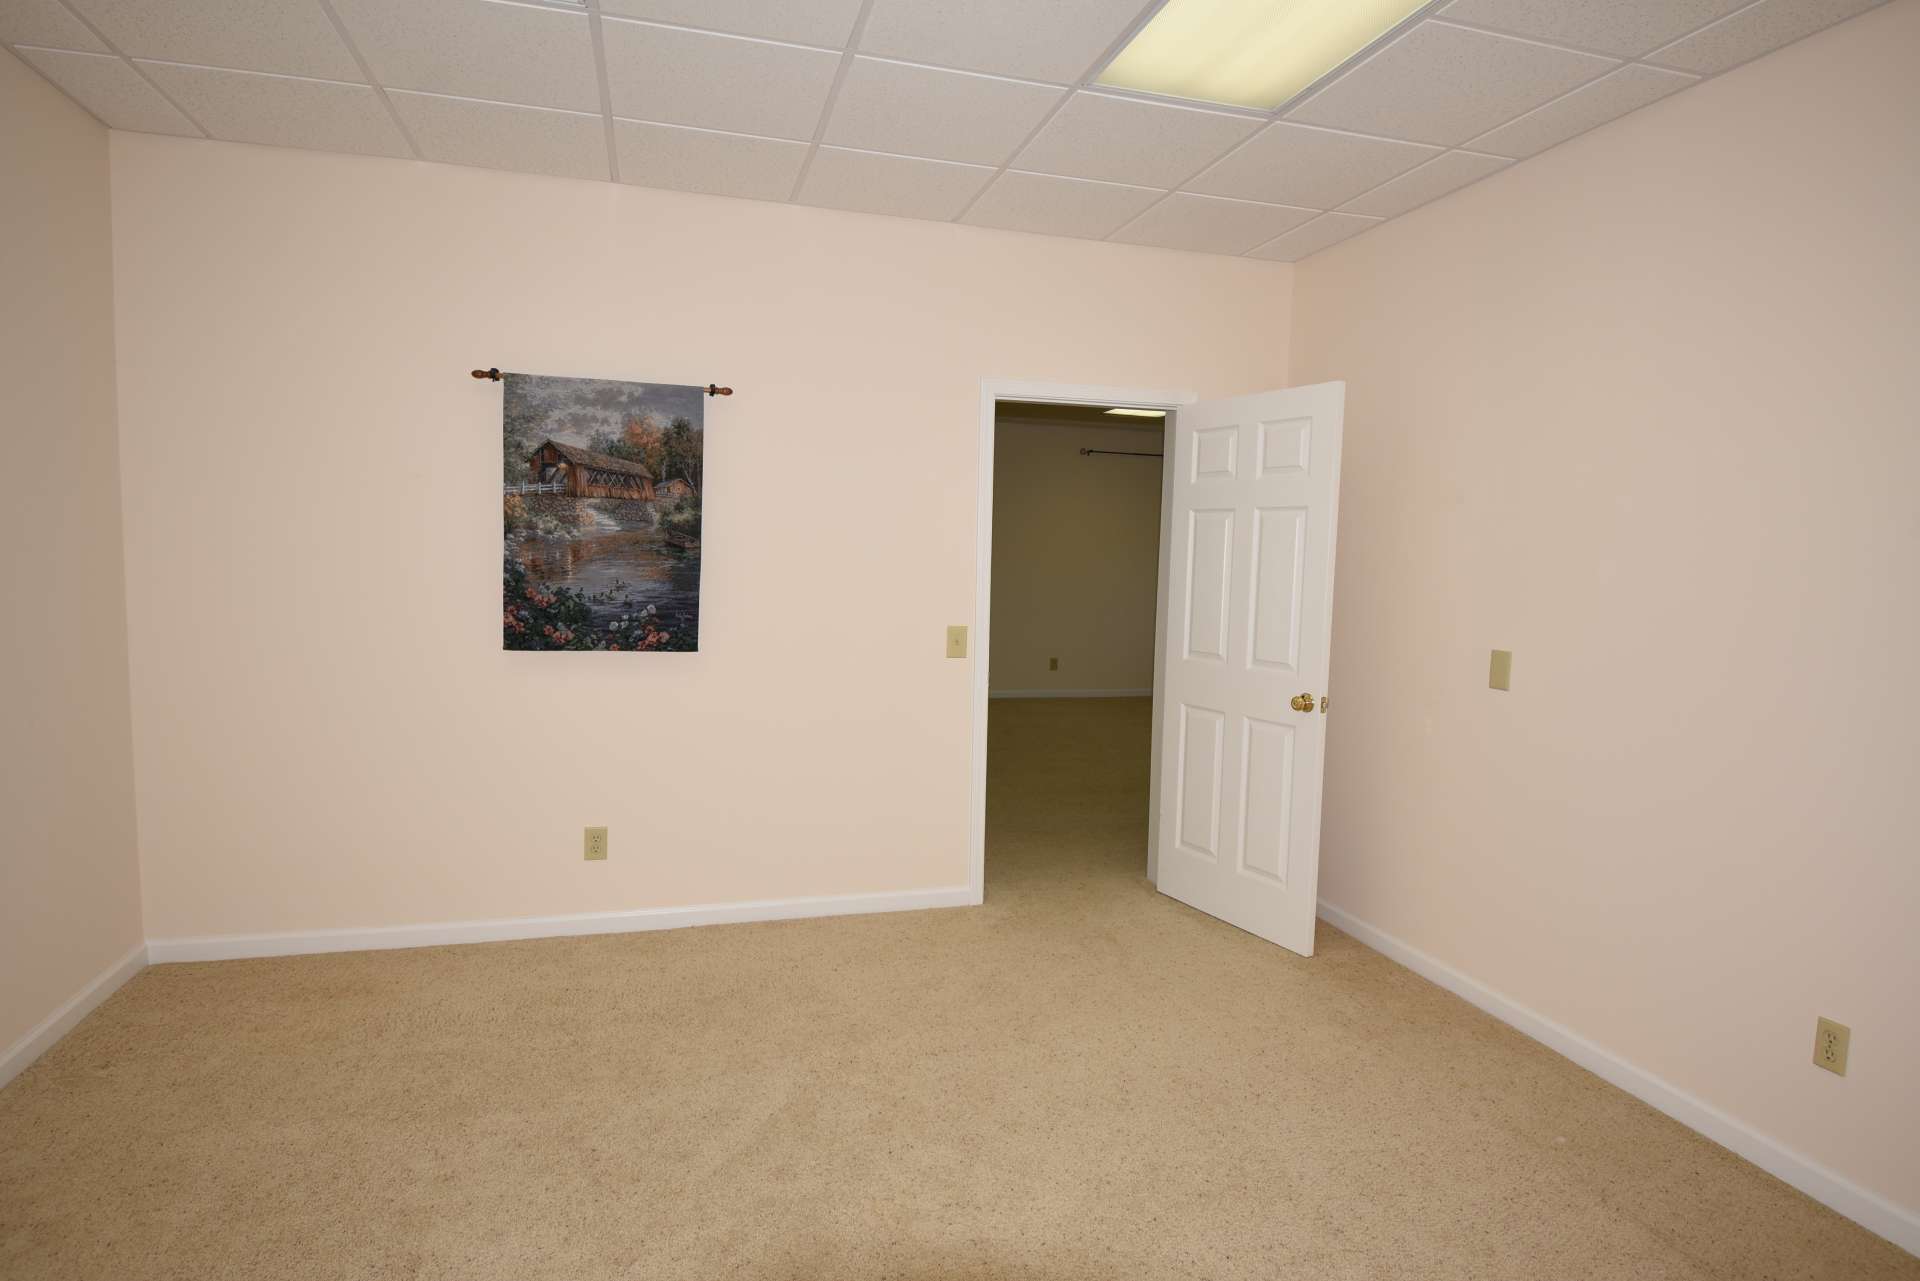 This charming bonus room is currently used as additional sleeping space.